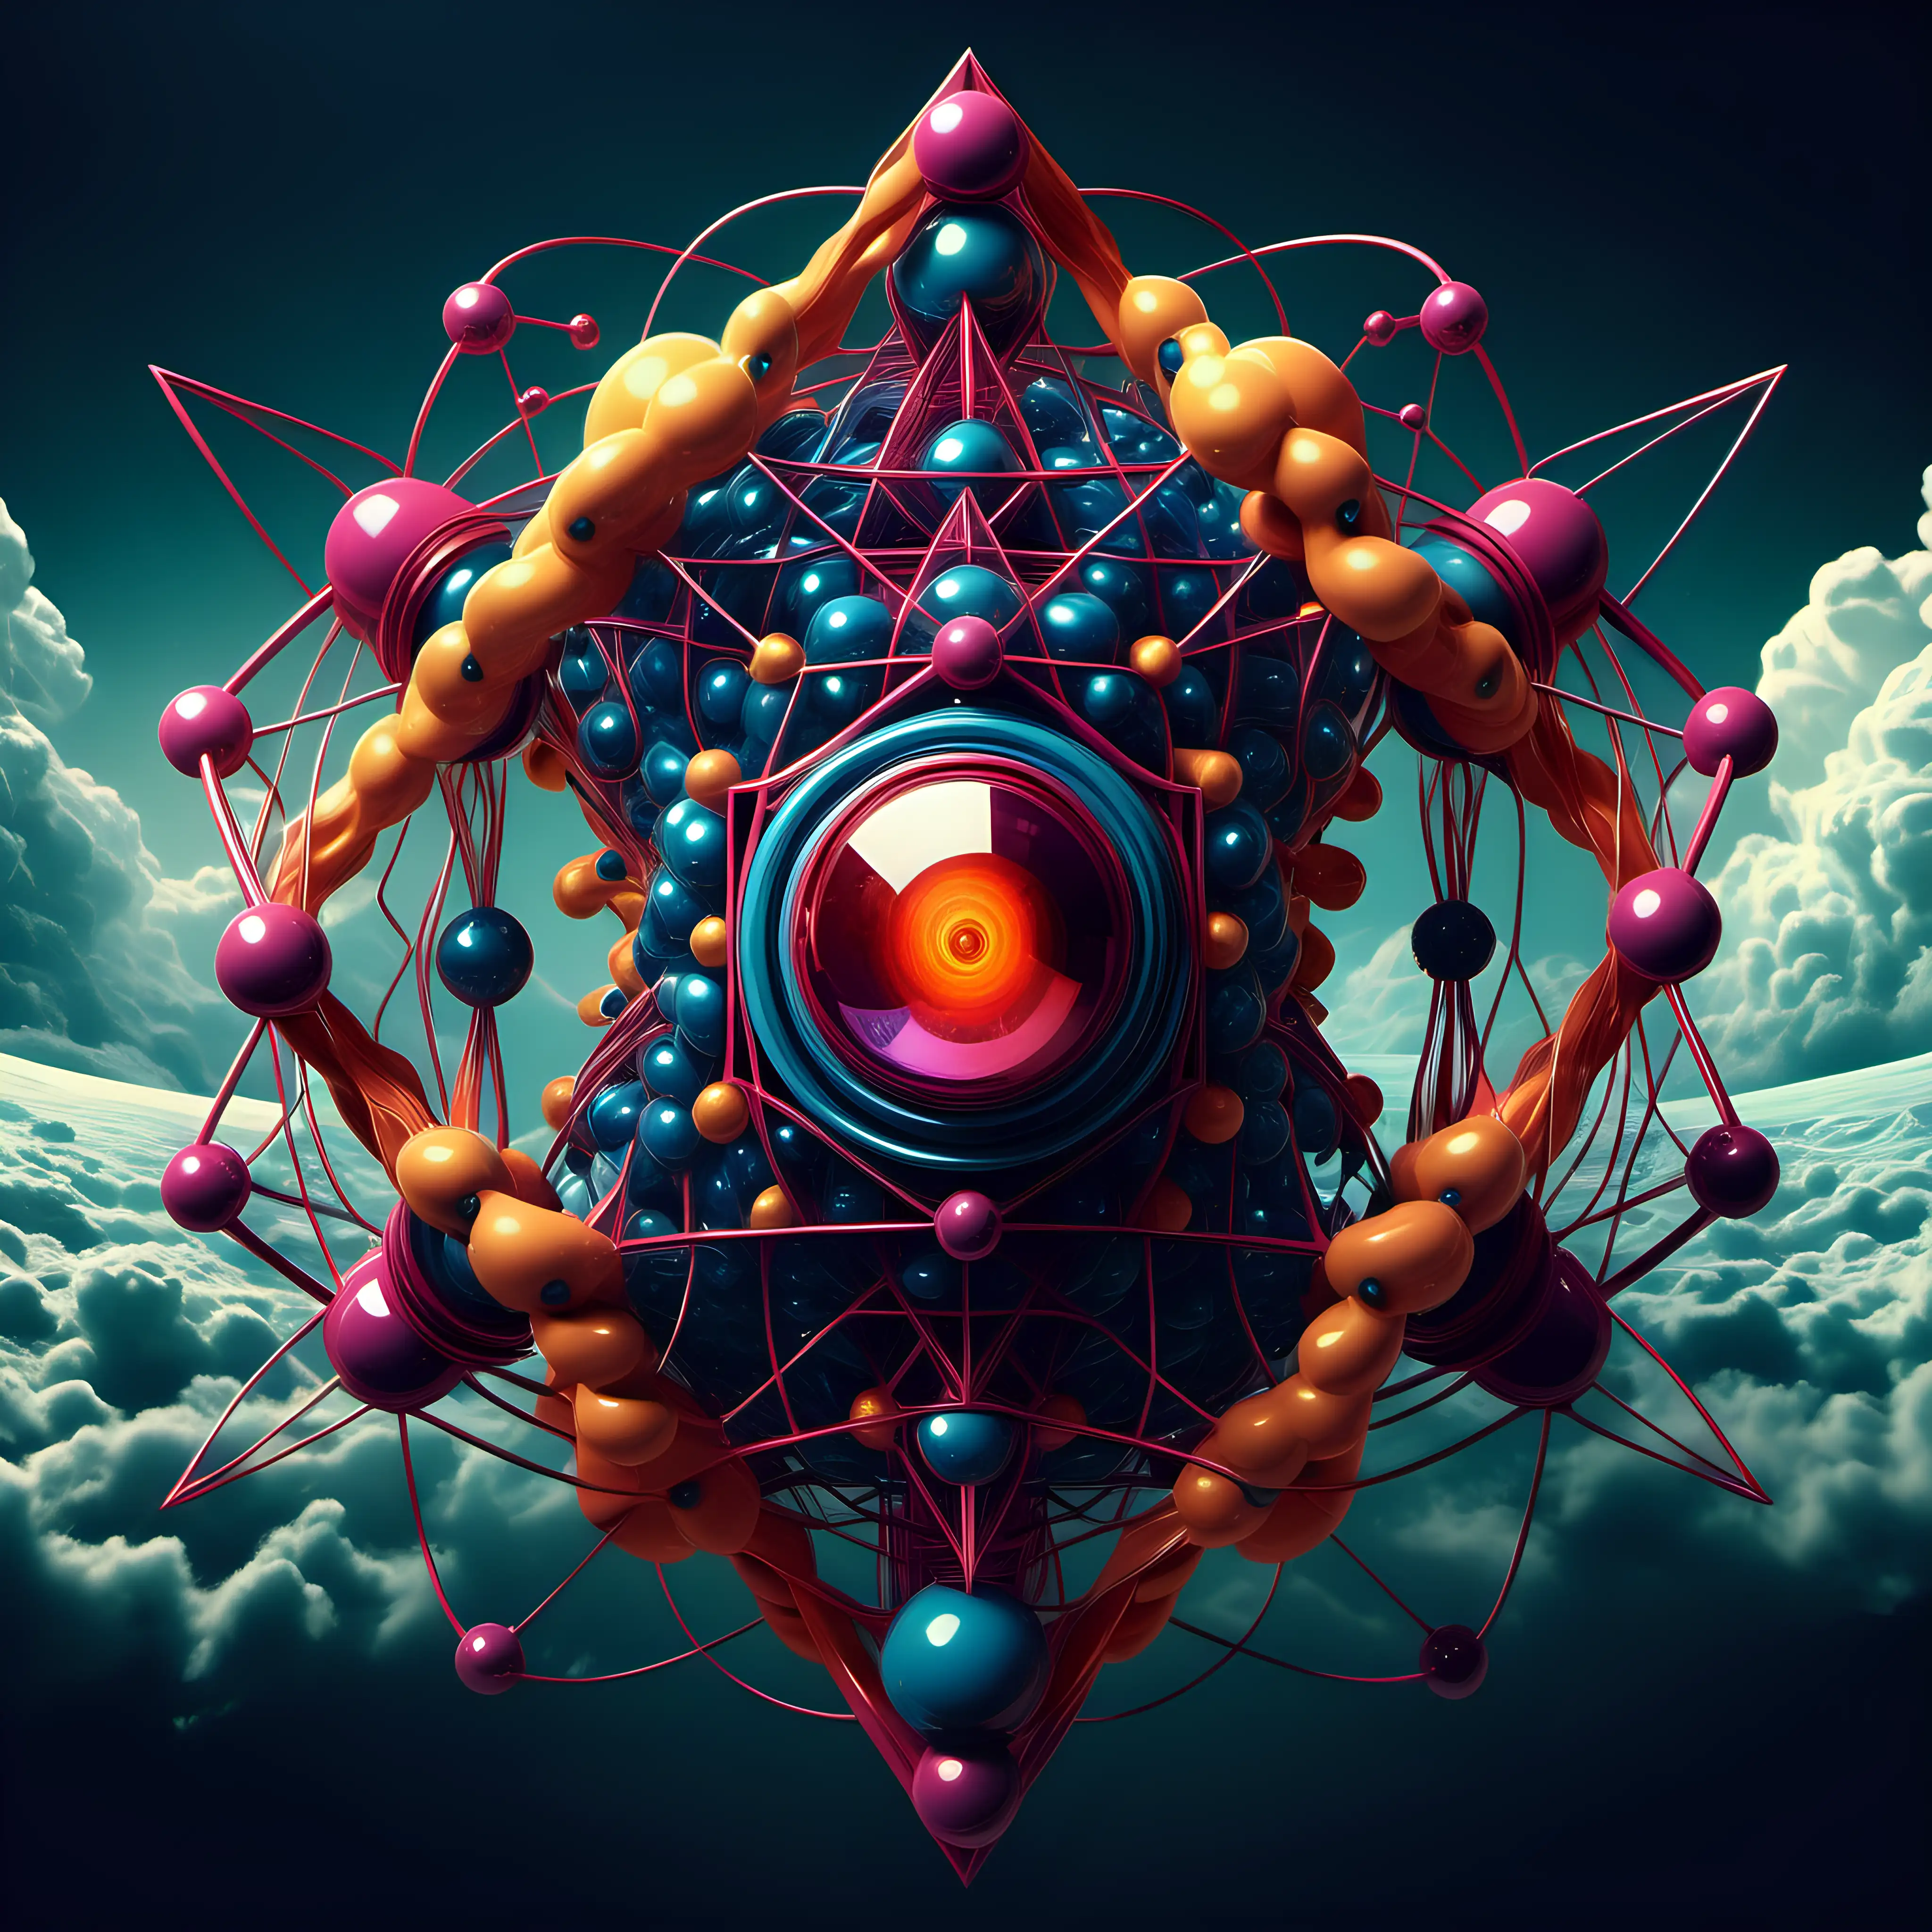 
"Craft an AI artwork that transforms the mundane into the extraordinary, taking inspiration from [ atomic protons in an abstract geometric realism ] and infusing it with surreal, fantastical elements." HD, High Quality imagery, strong bold colors.